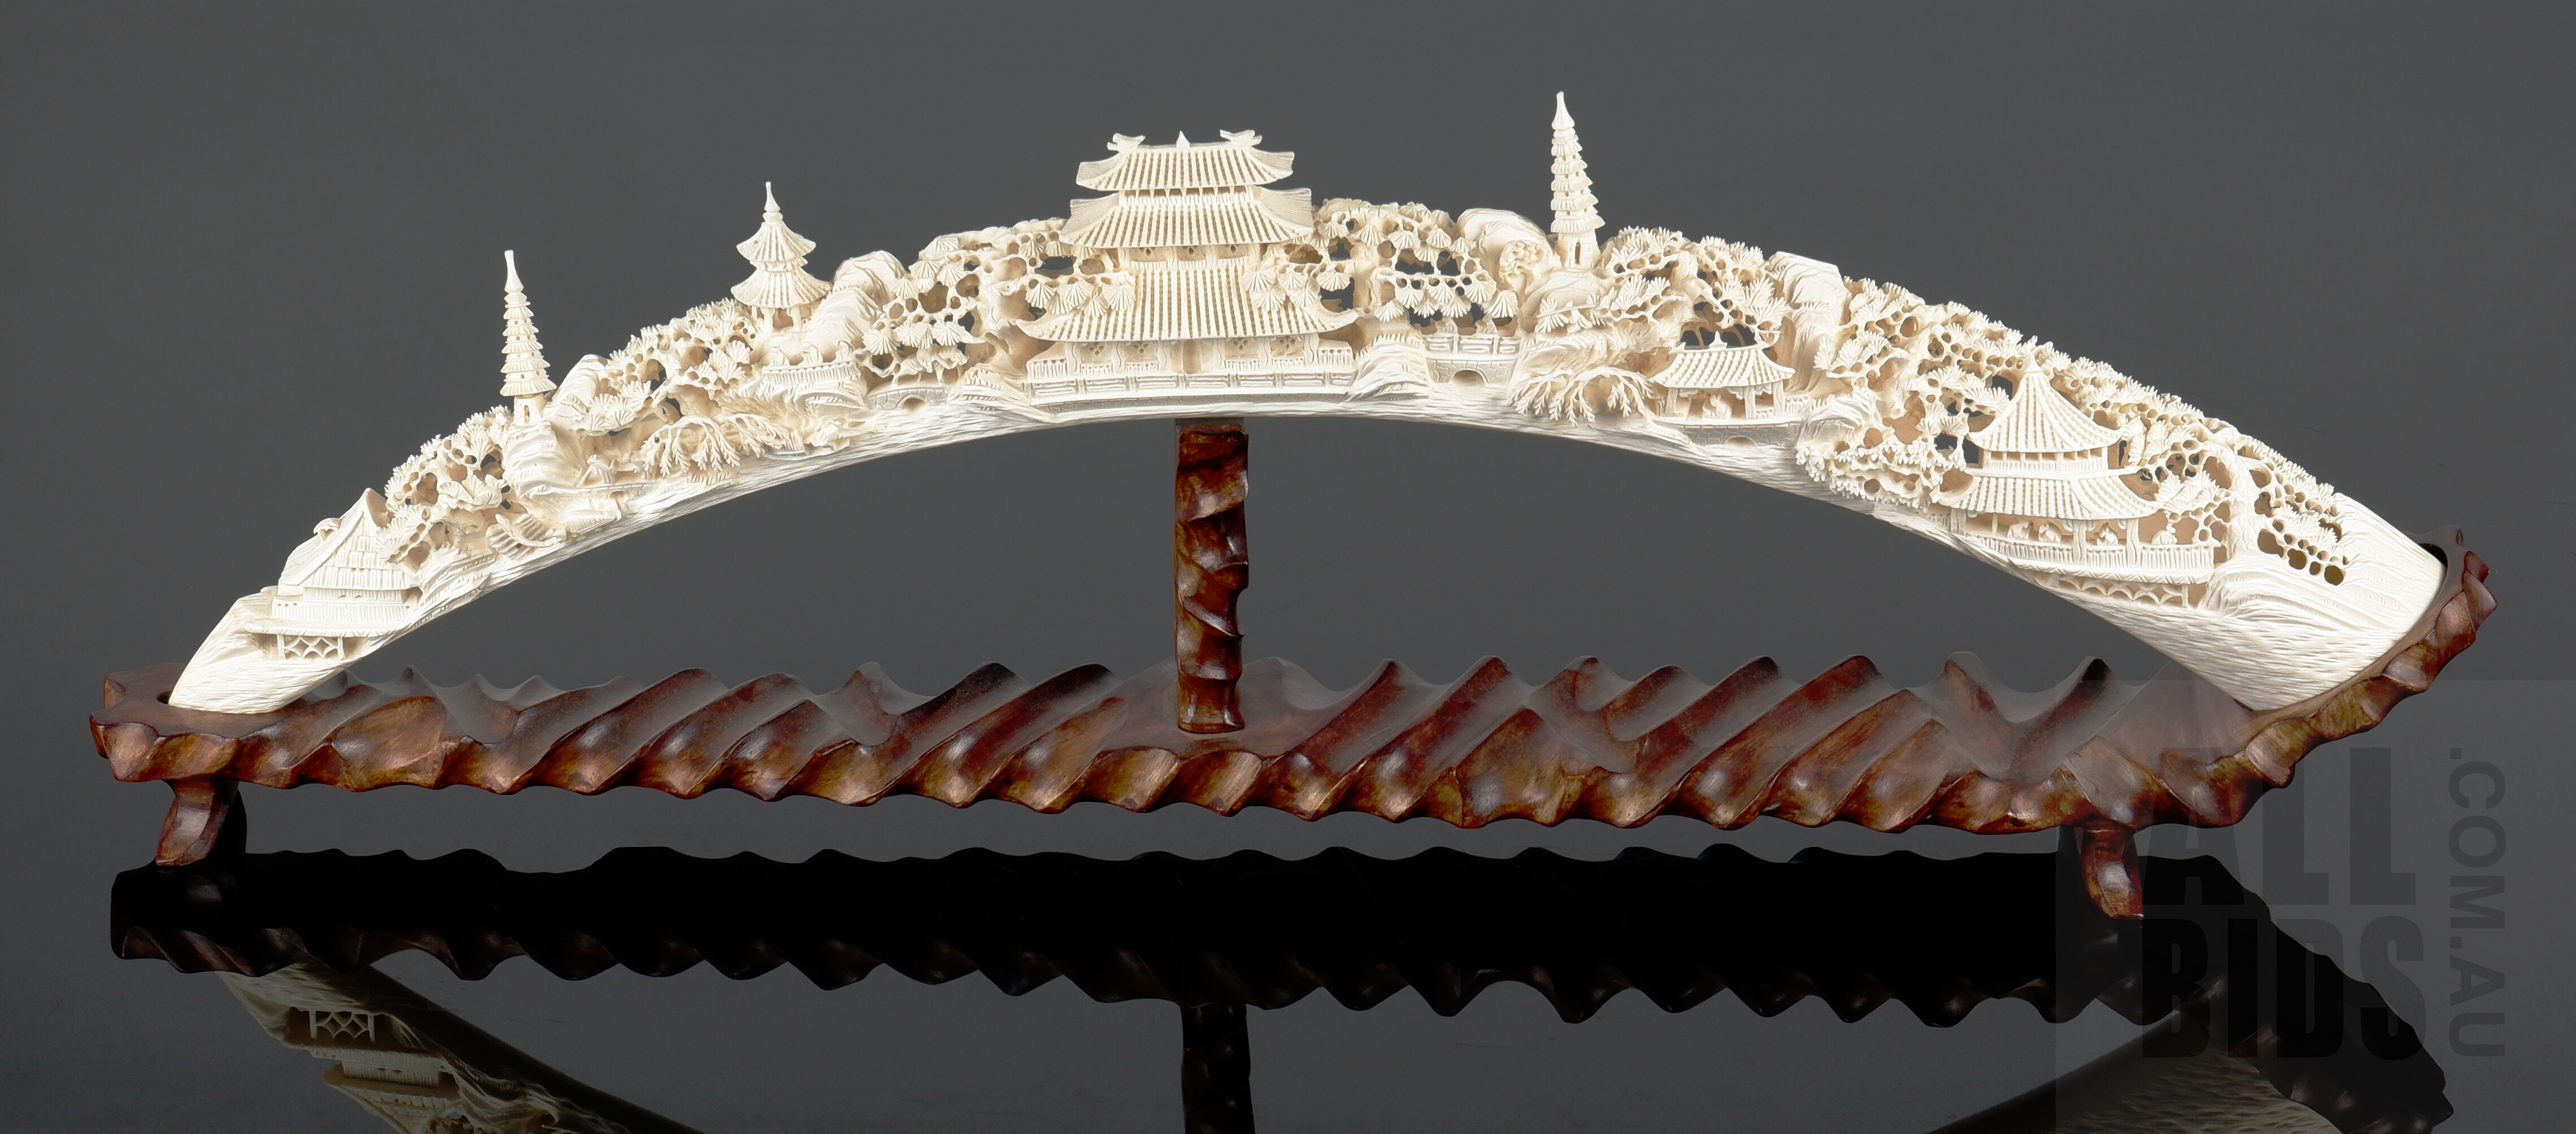 ' Chinese Carved and Peirced Ivory Pagoda Garden Bridge, Circa 1960s'